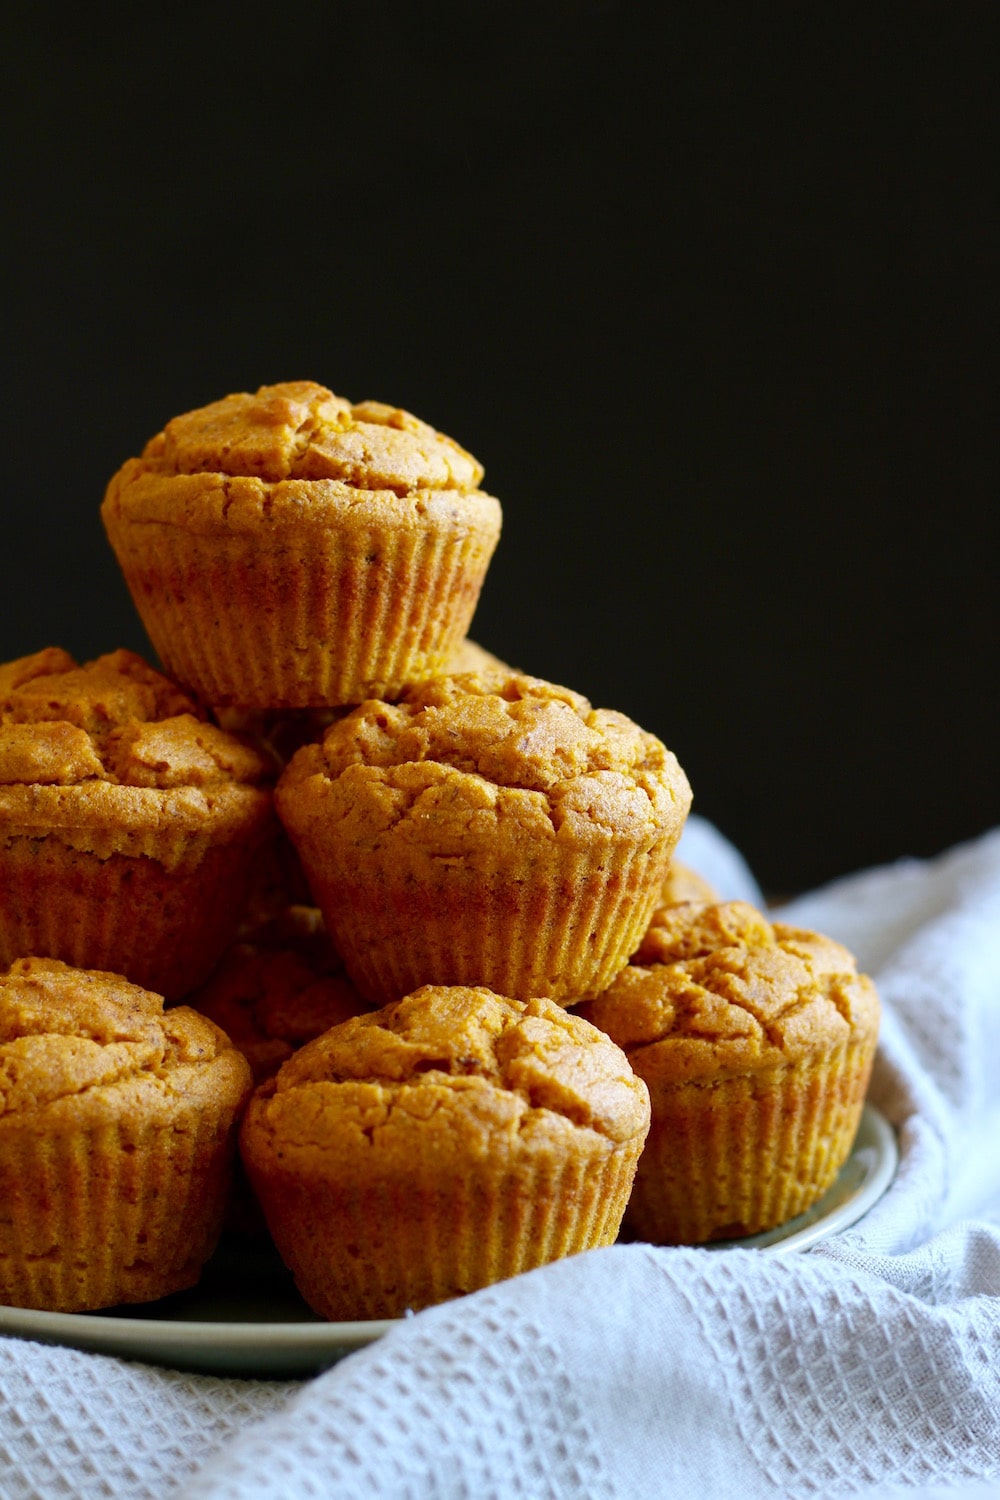 Sunlight shinning on a big stack of vegan pumpkin cornbread muffins stack on a plate with a grey textured towel beneath it. 